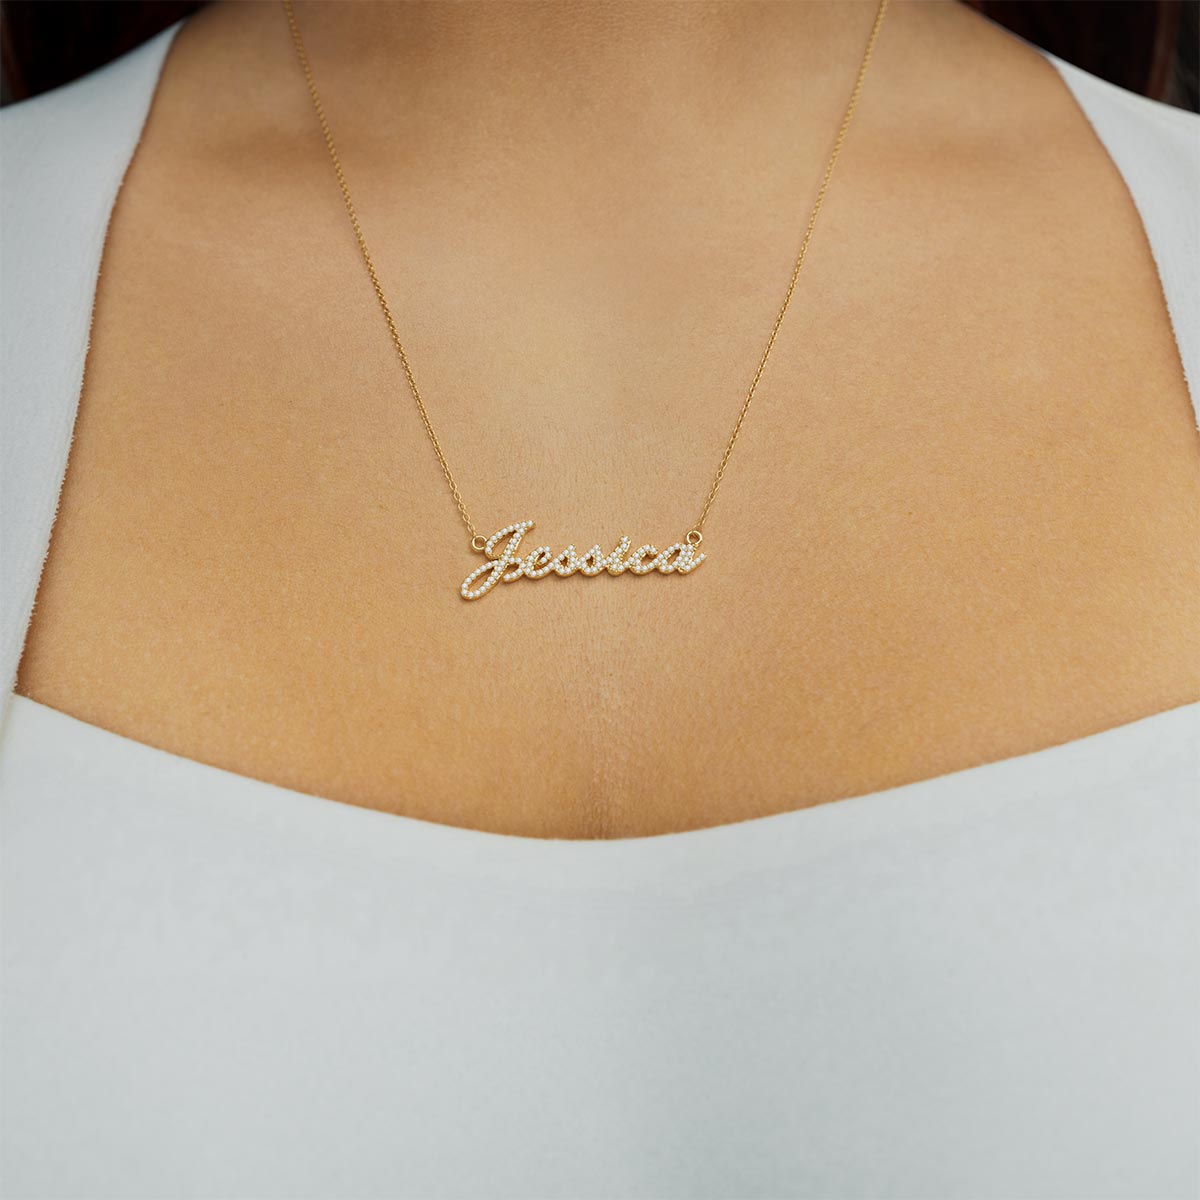 Personalized Pavé Name Necklace